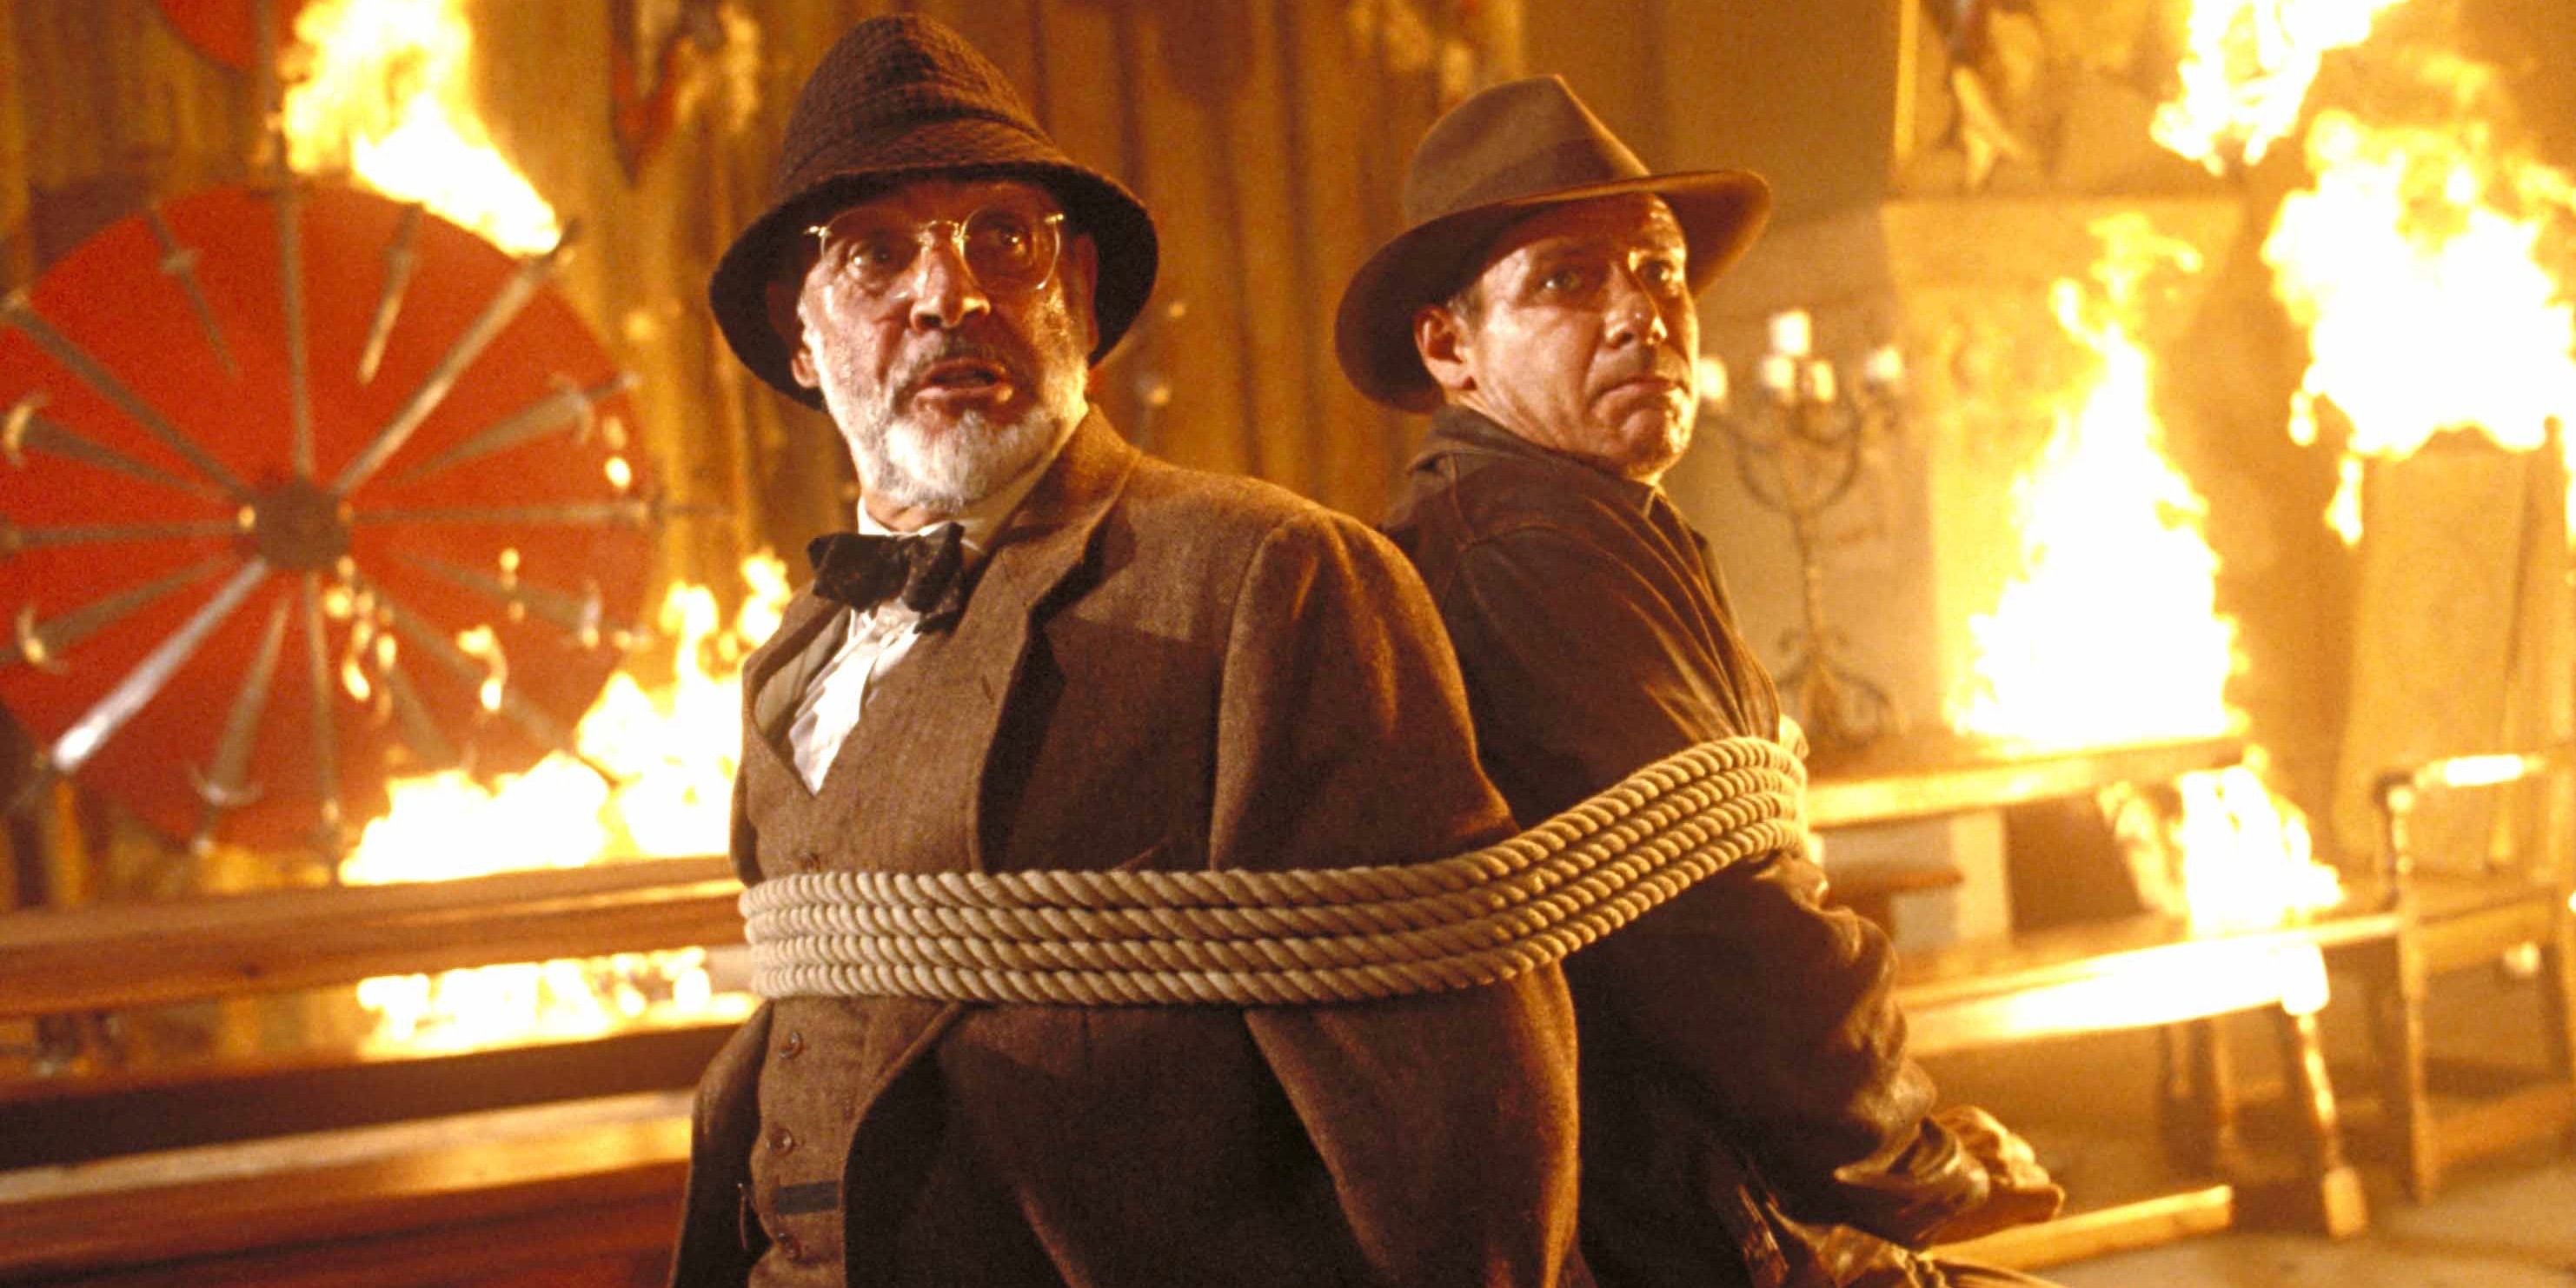 Henry and Indiana Jones tied to a chair in Indiana Jones and the Last Crusade